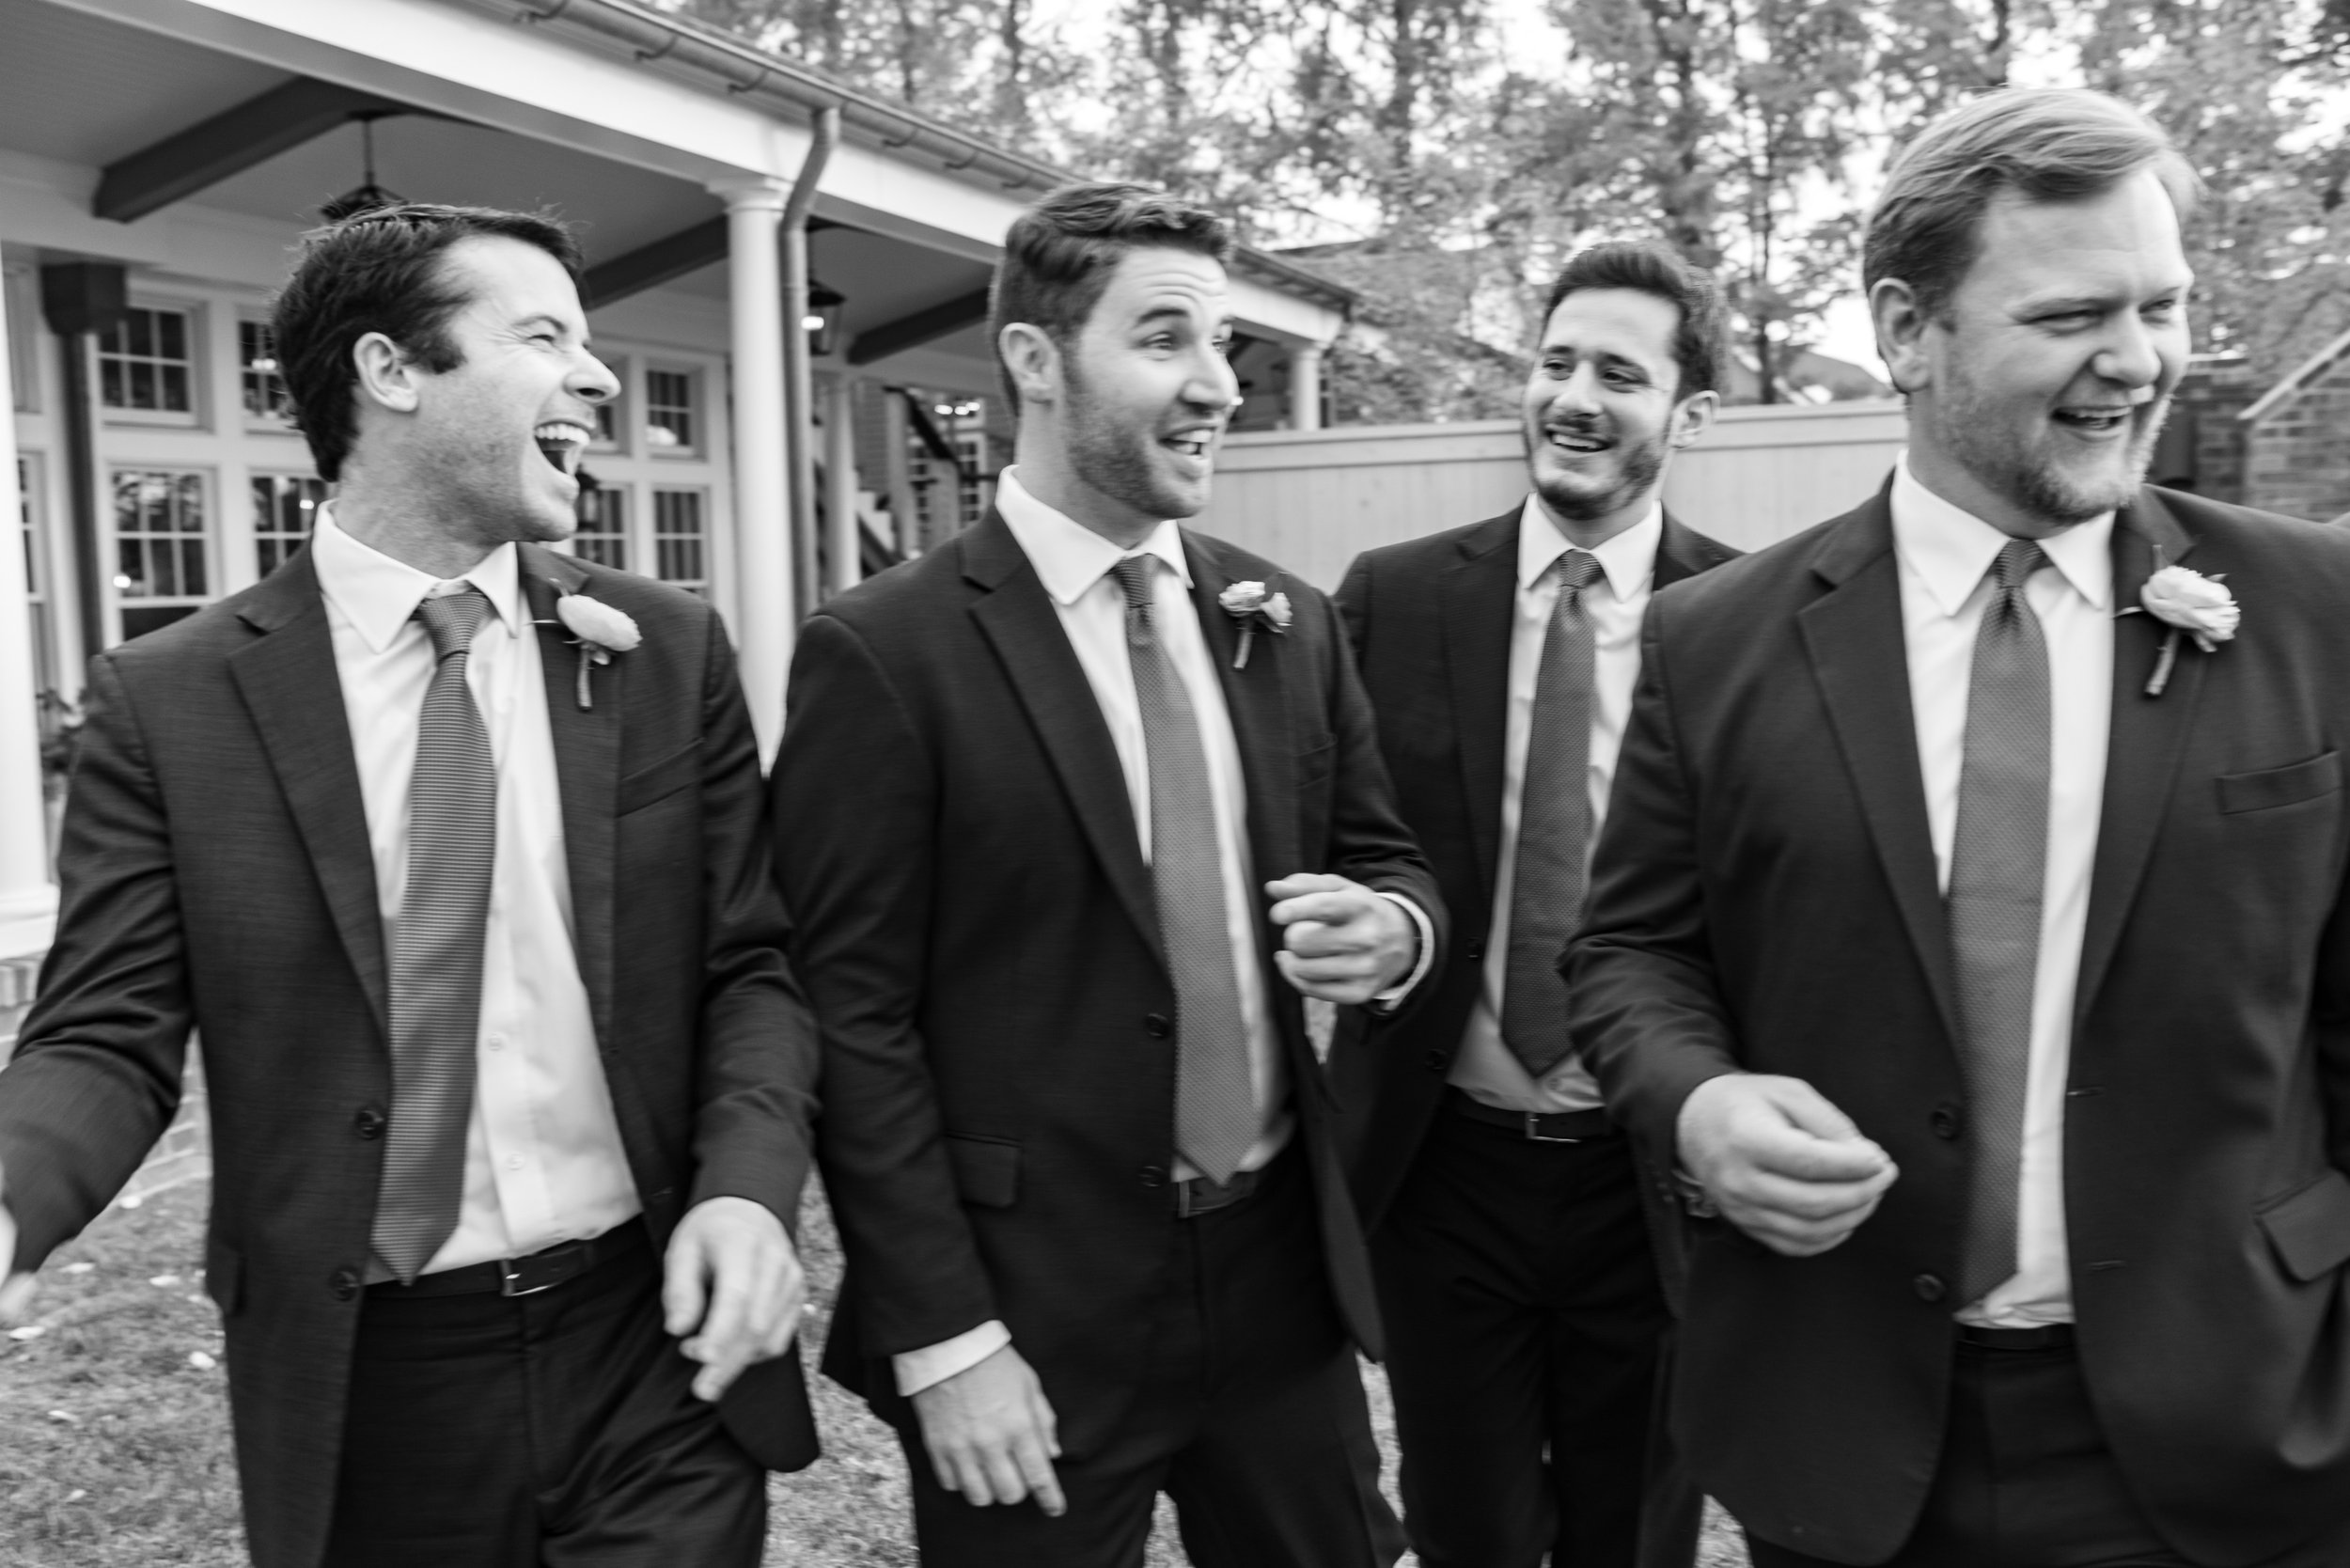 black and white film style image of groomsmen walking and laughing candid